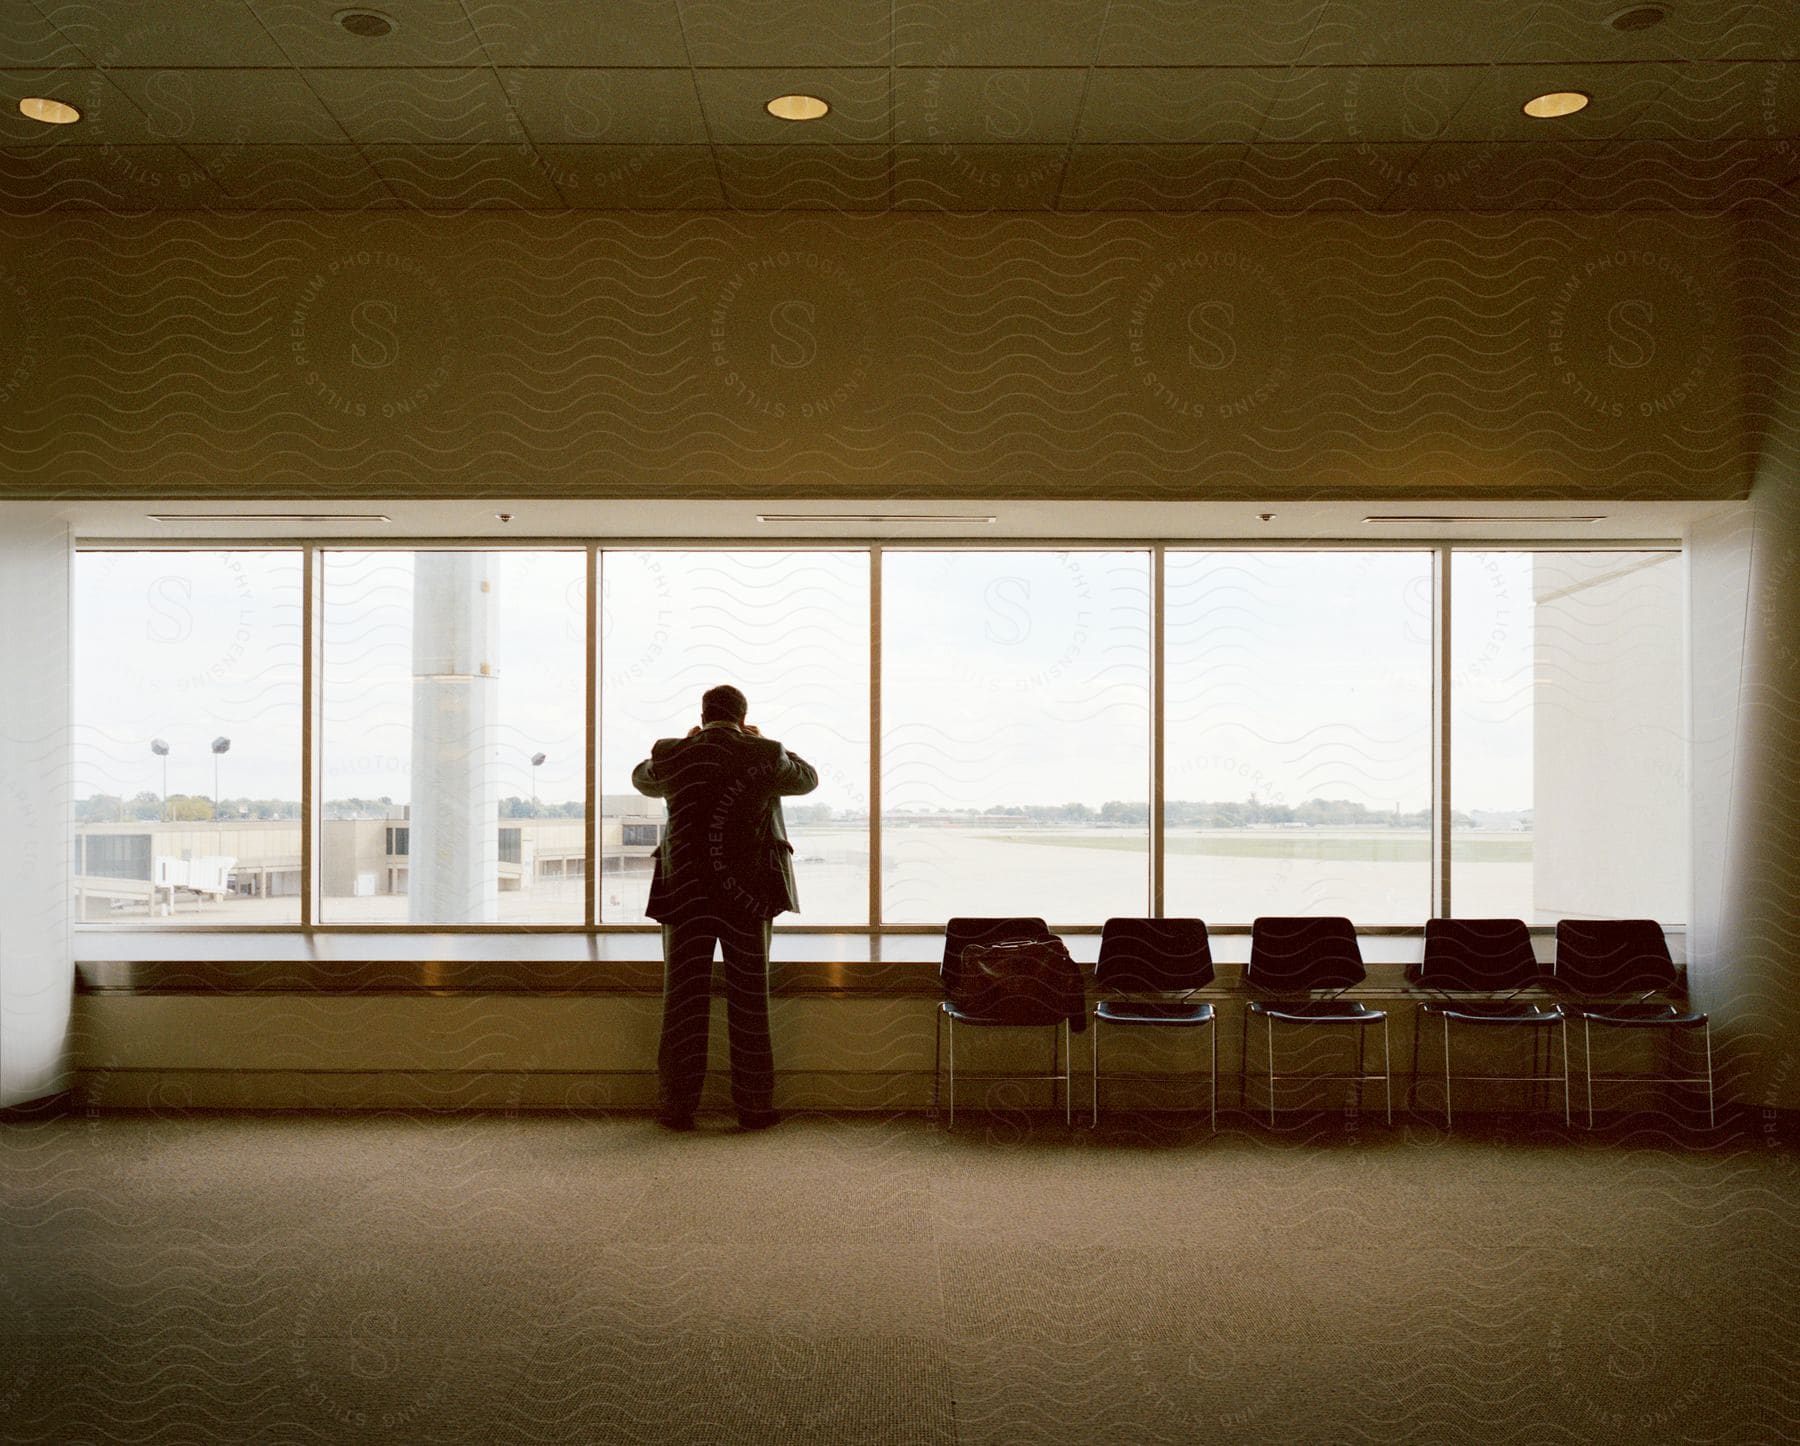 A man standing in a hall near a window with chairs beside him